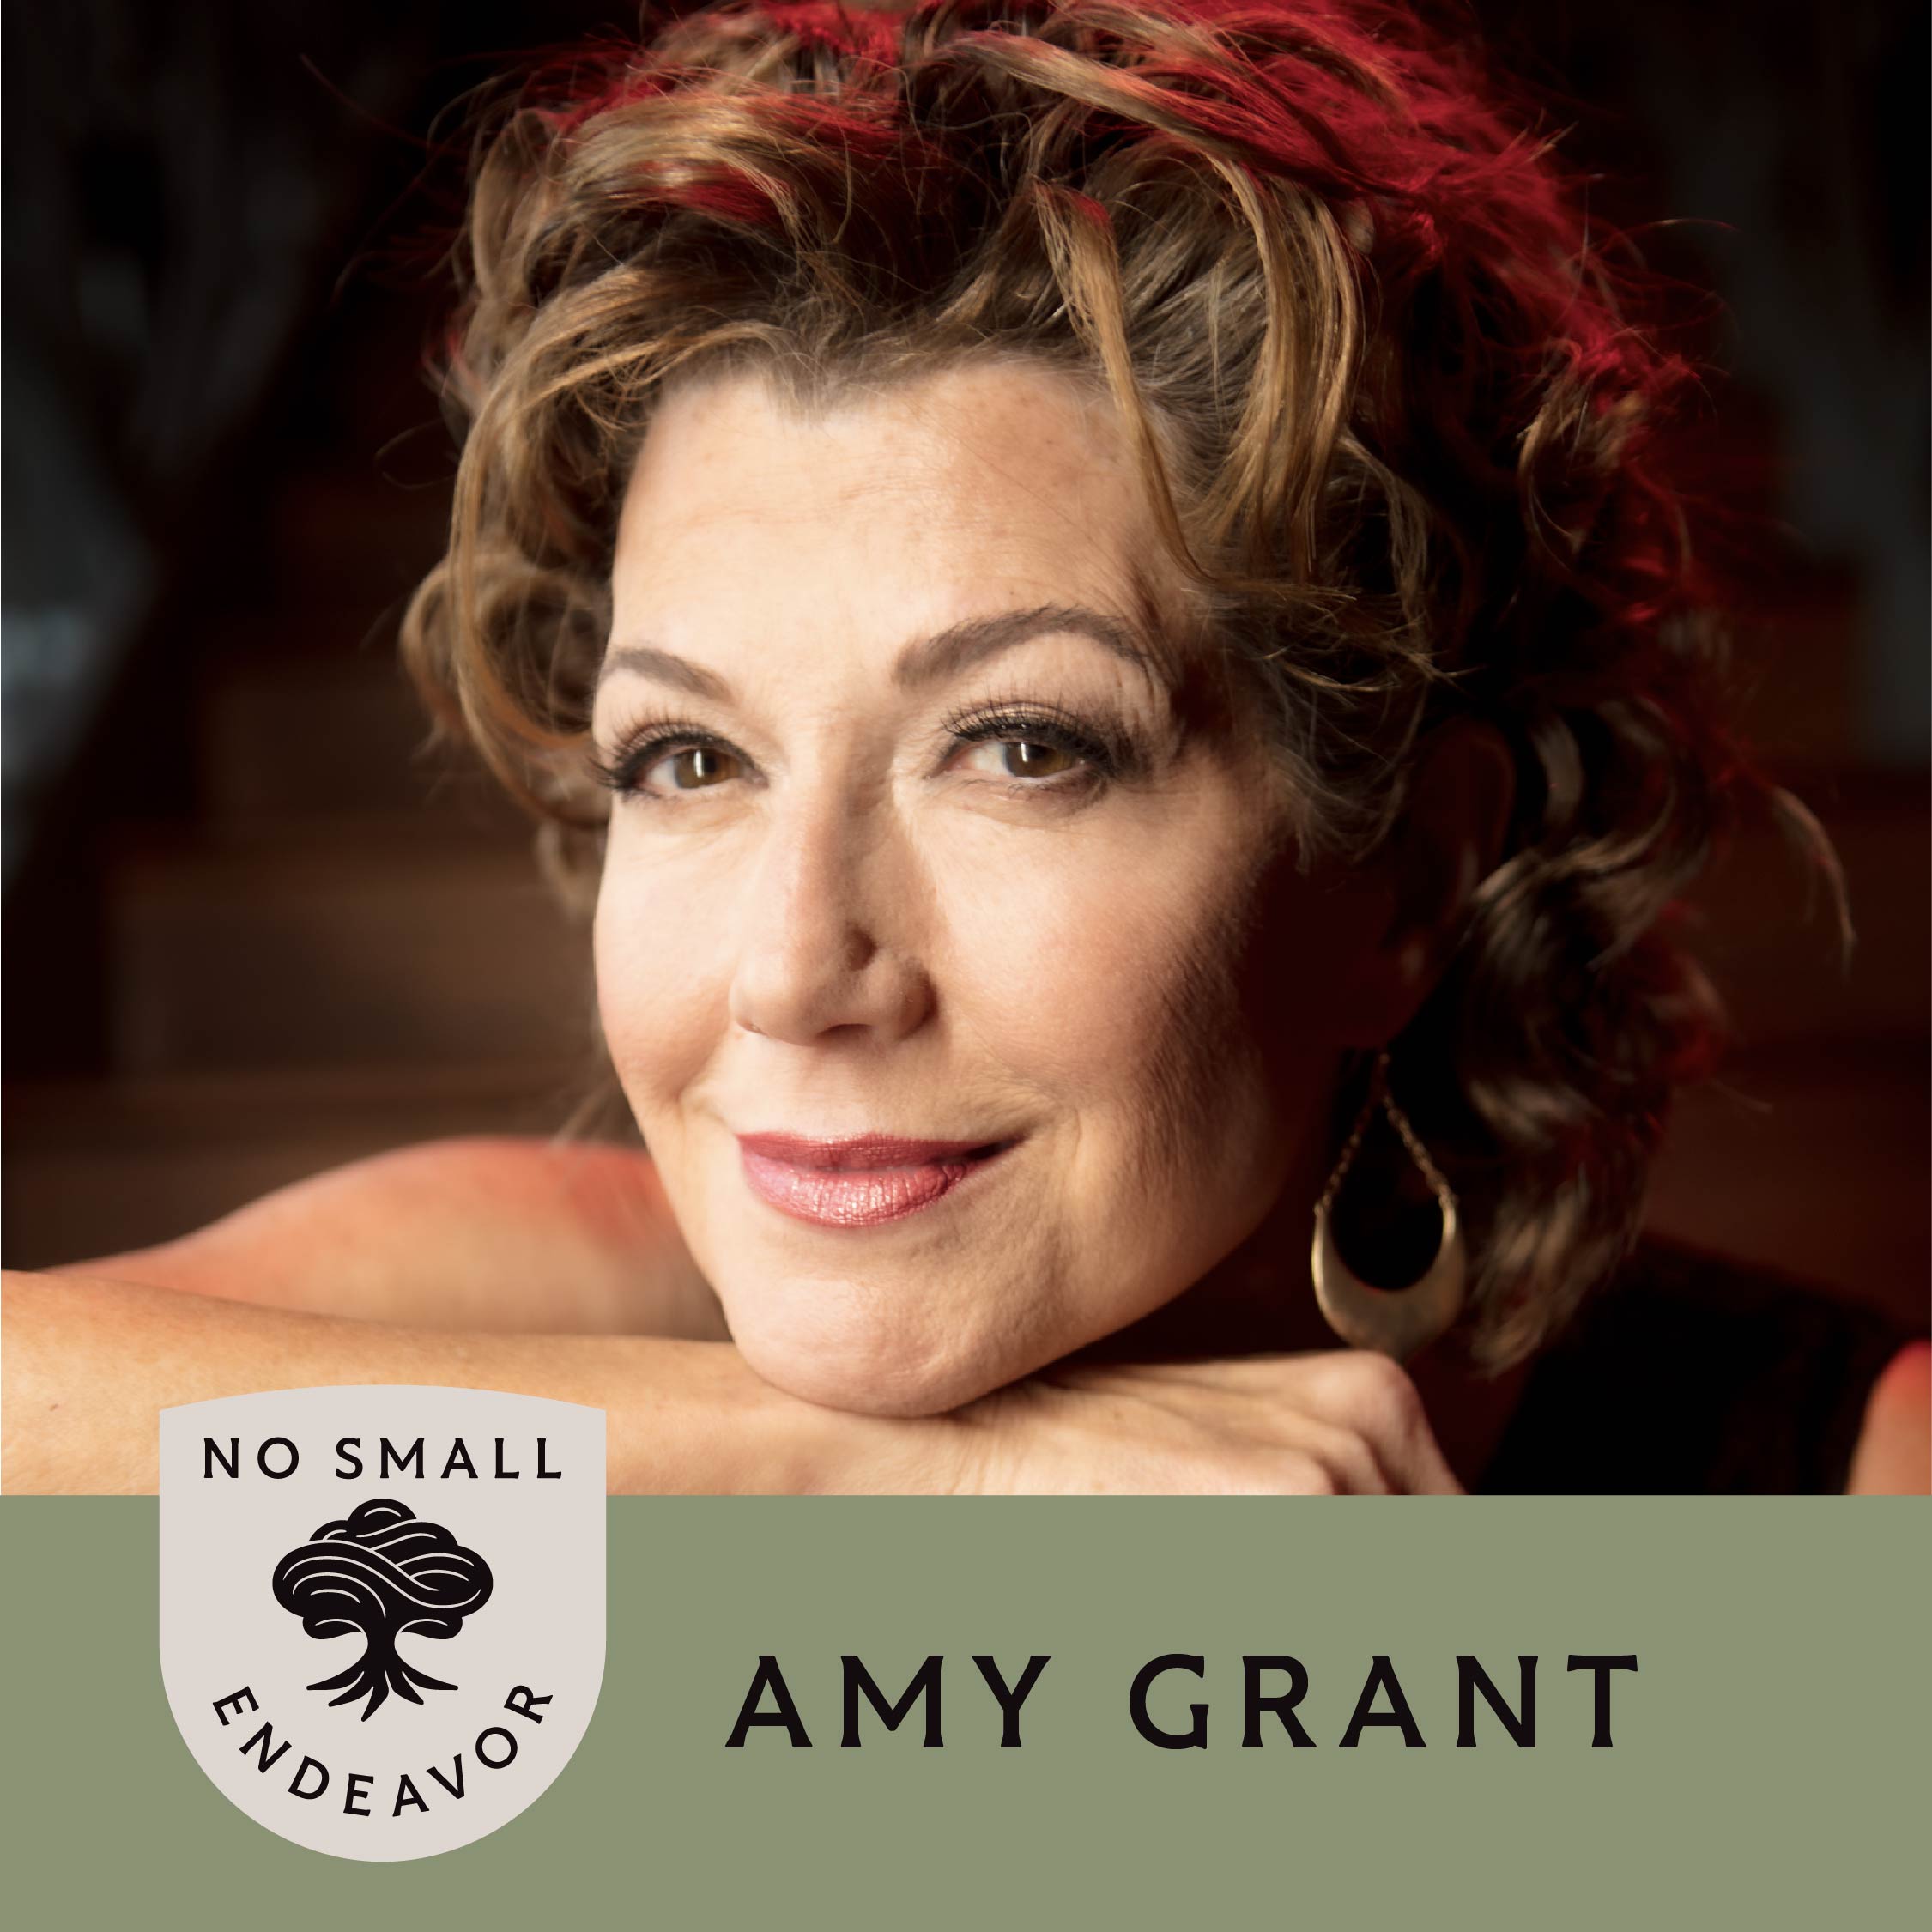 Thumbnail for "124: Amy Grant: Fame, Vulnerability, and Staying Grounded".